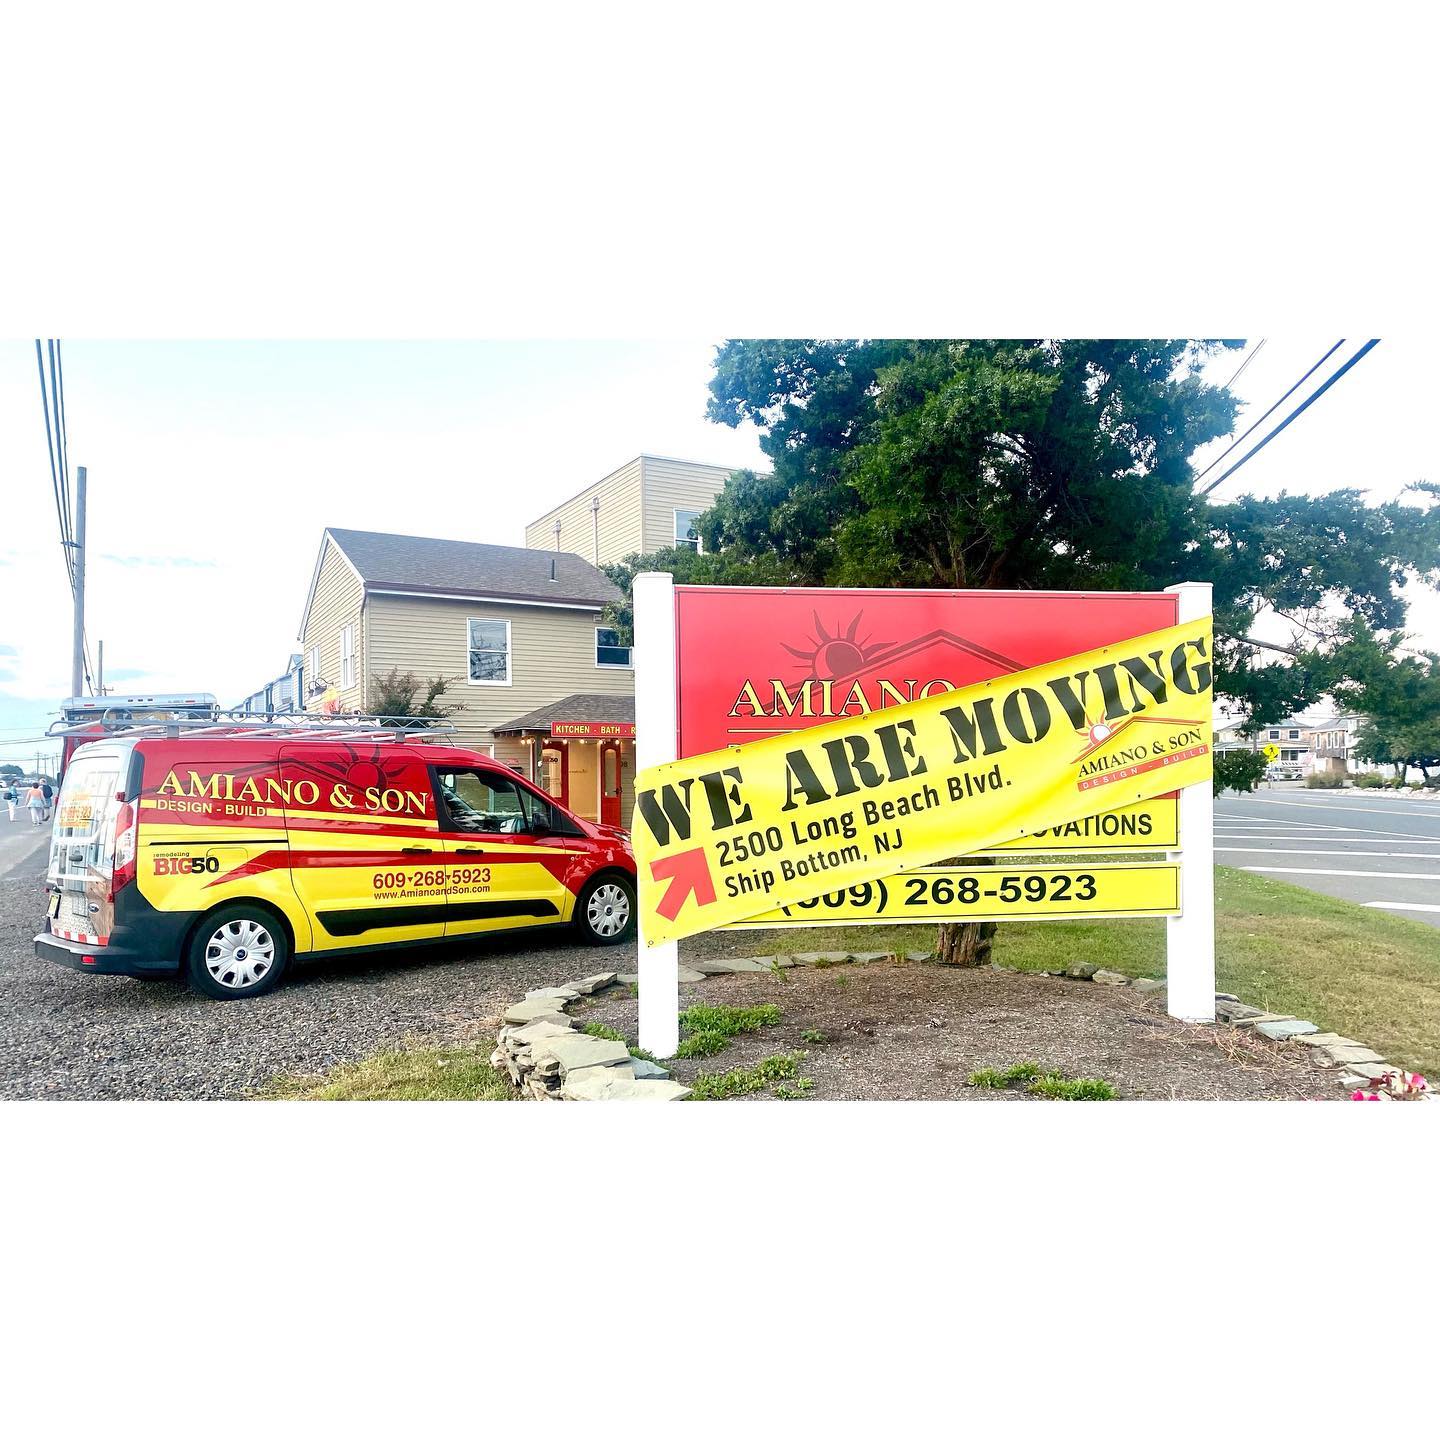 Amiano and son are moving sign